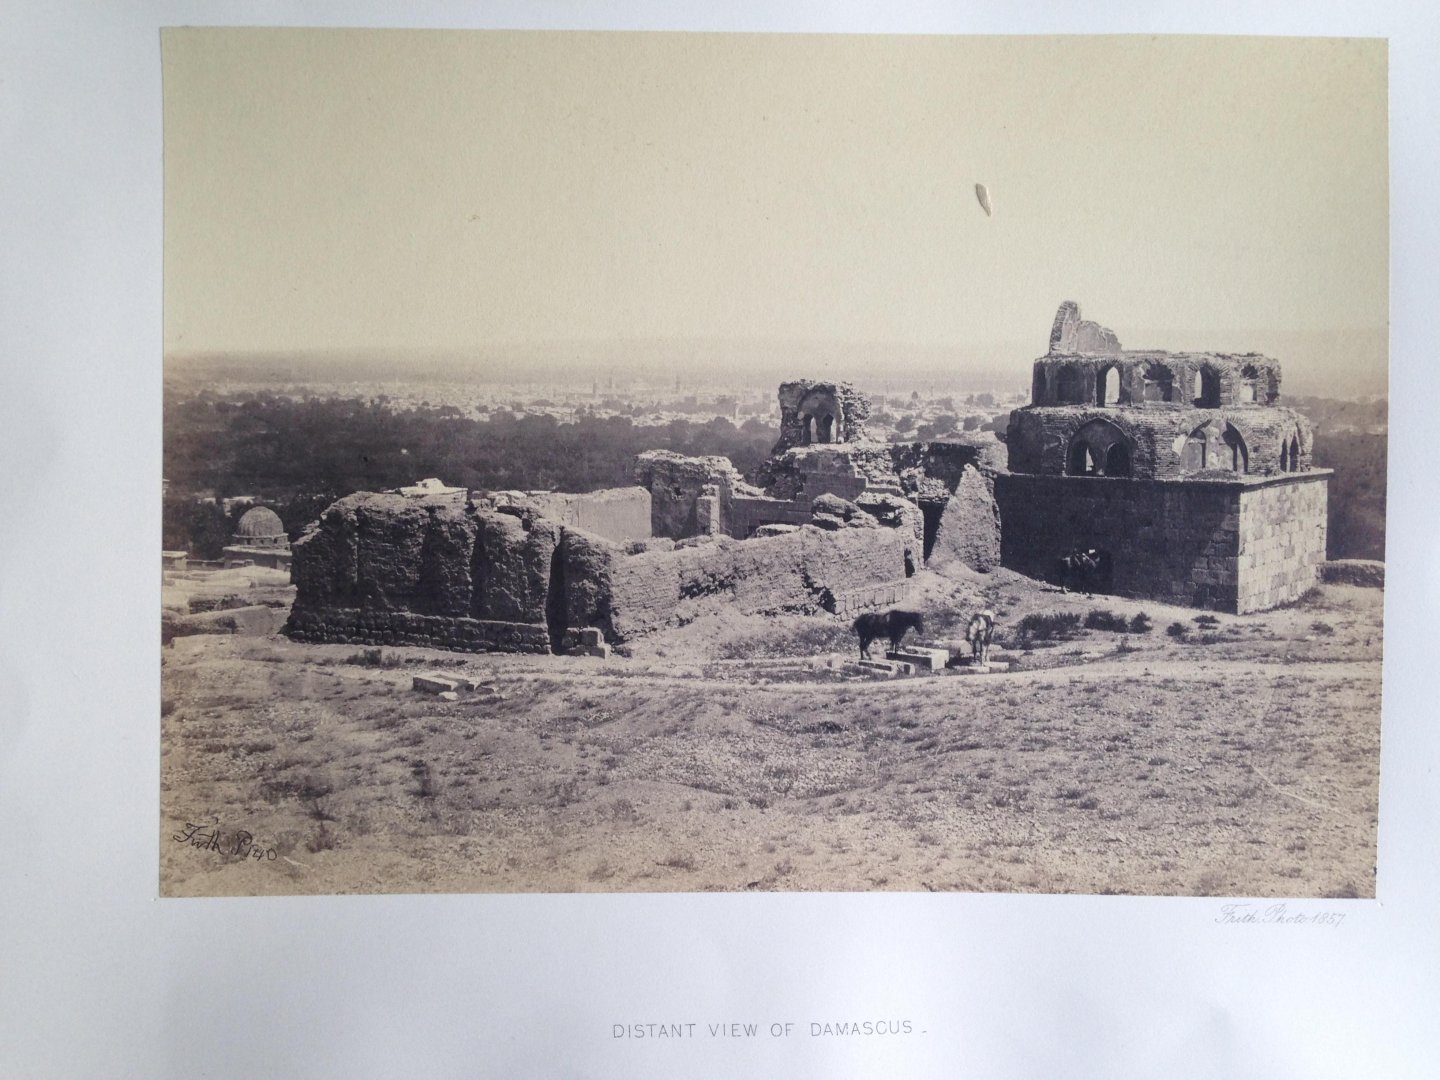 Frith, Francis - Distant view of Damascus, Series Egypt and Palestine